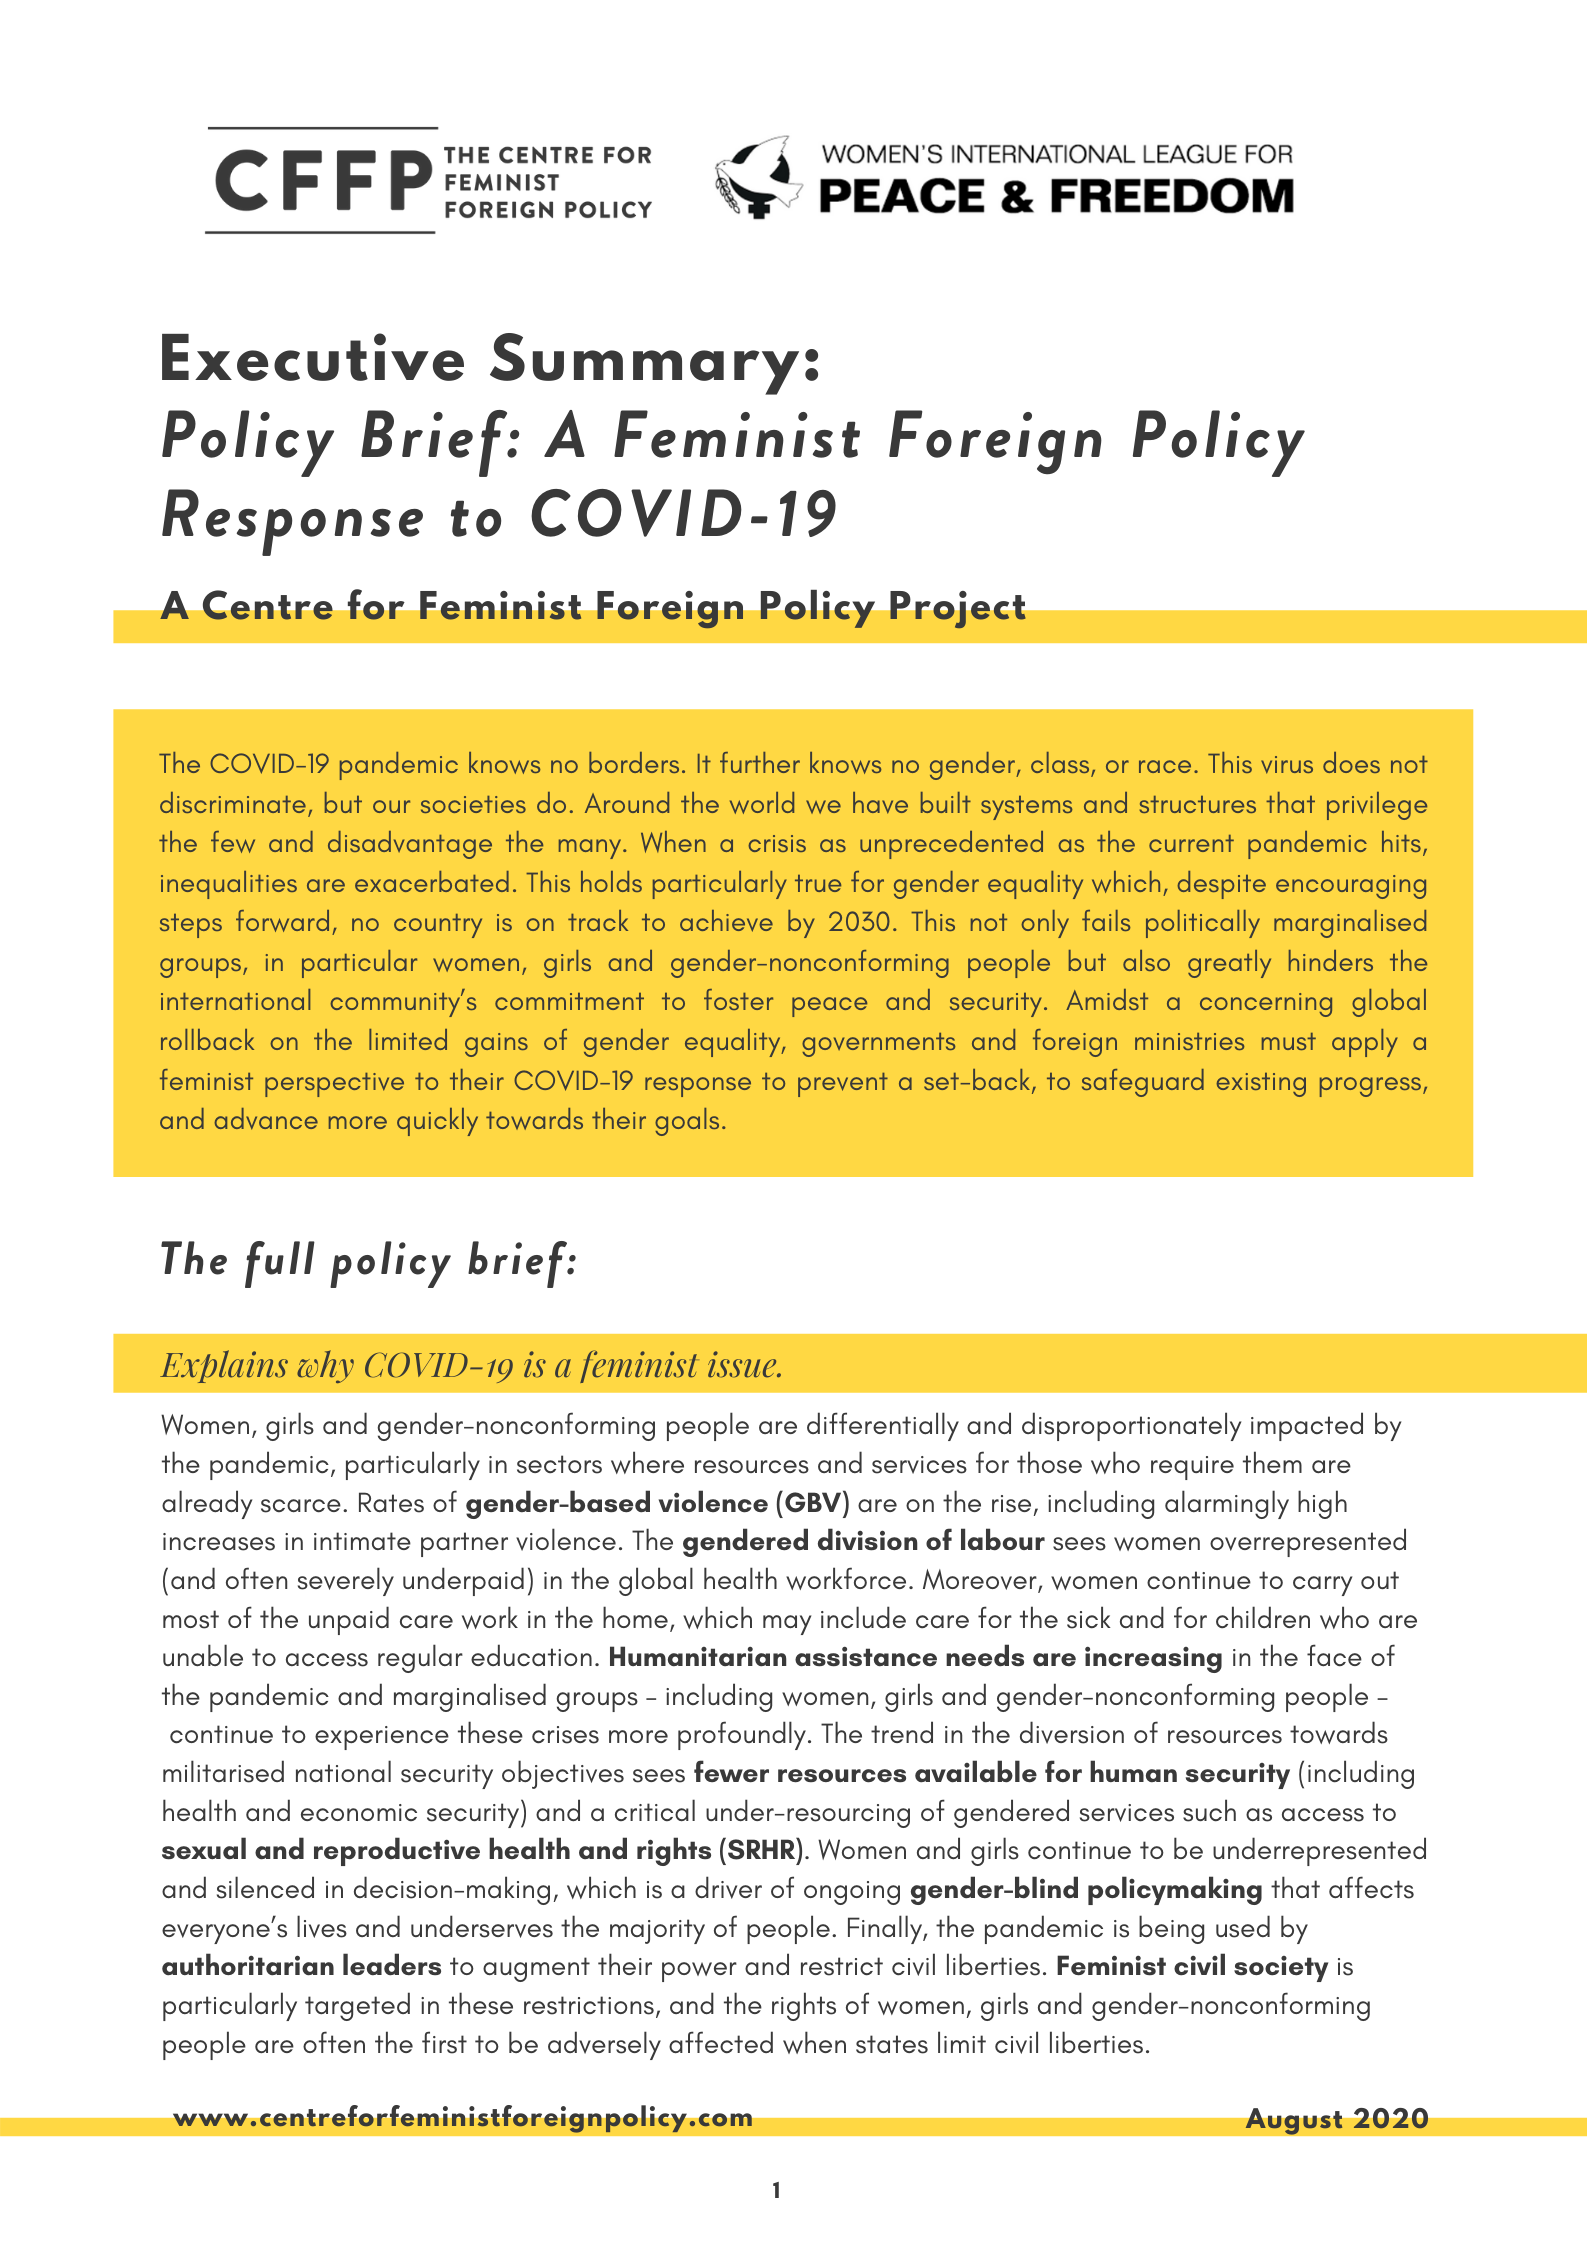 First Page - Executive Summary - Policy Brief_ A Feminist Foreign Policy Response to COVID-19.png